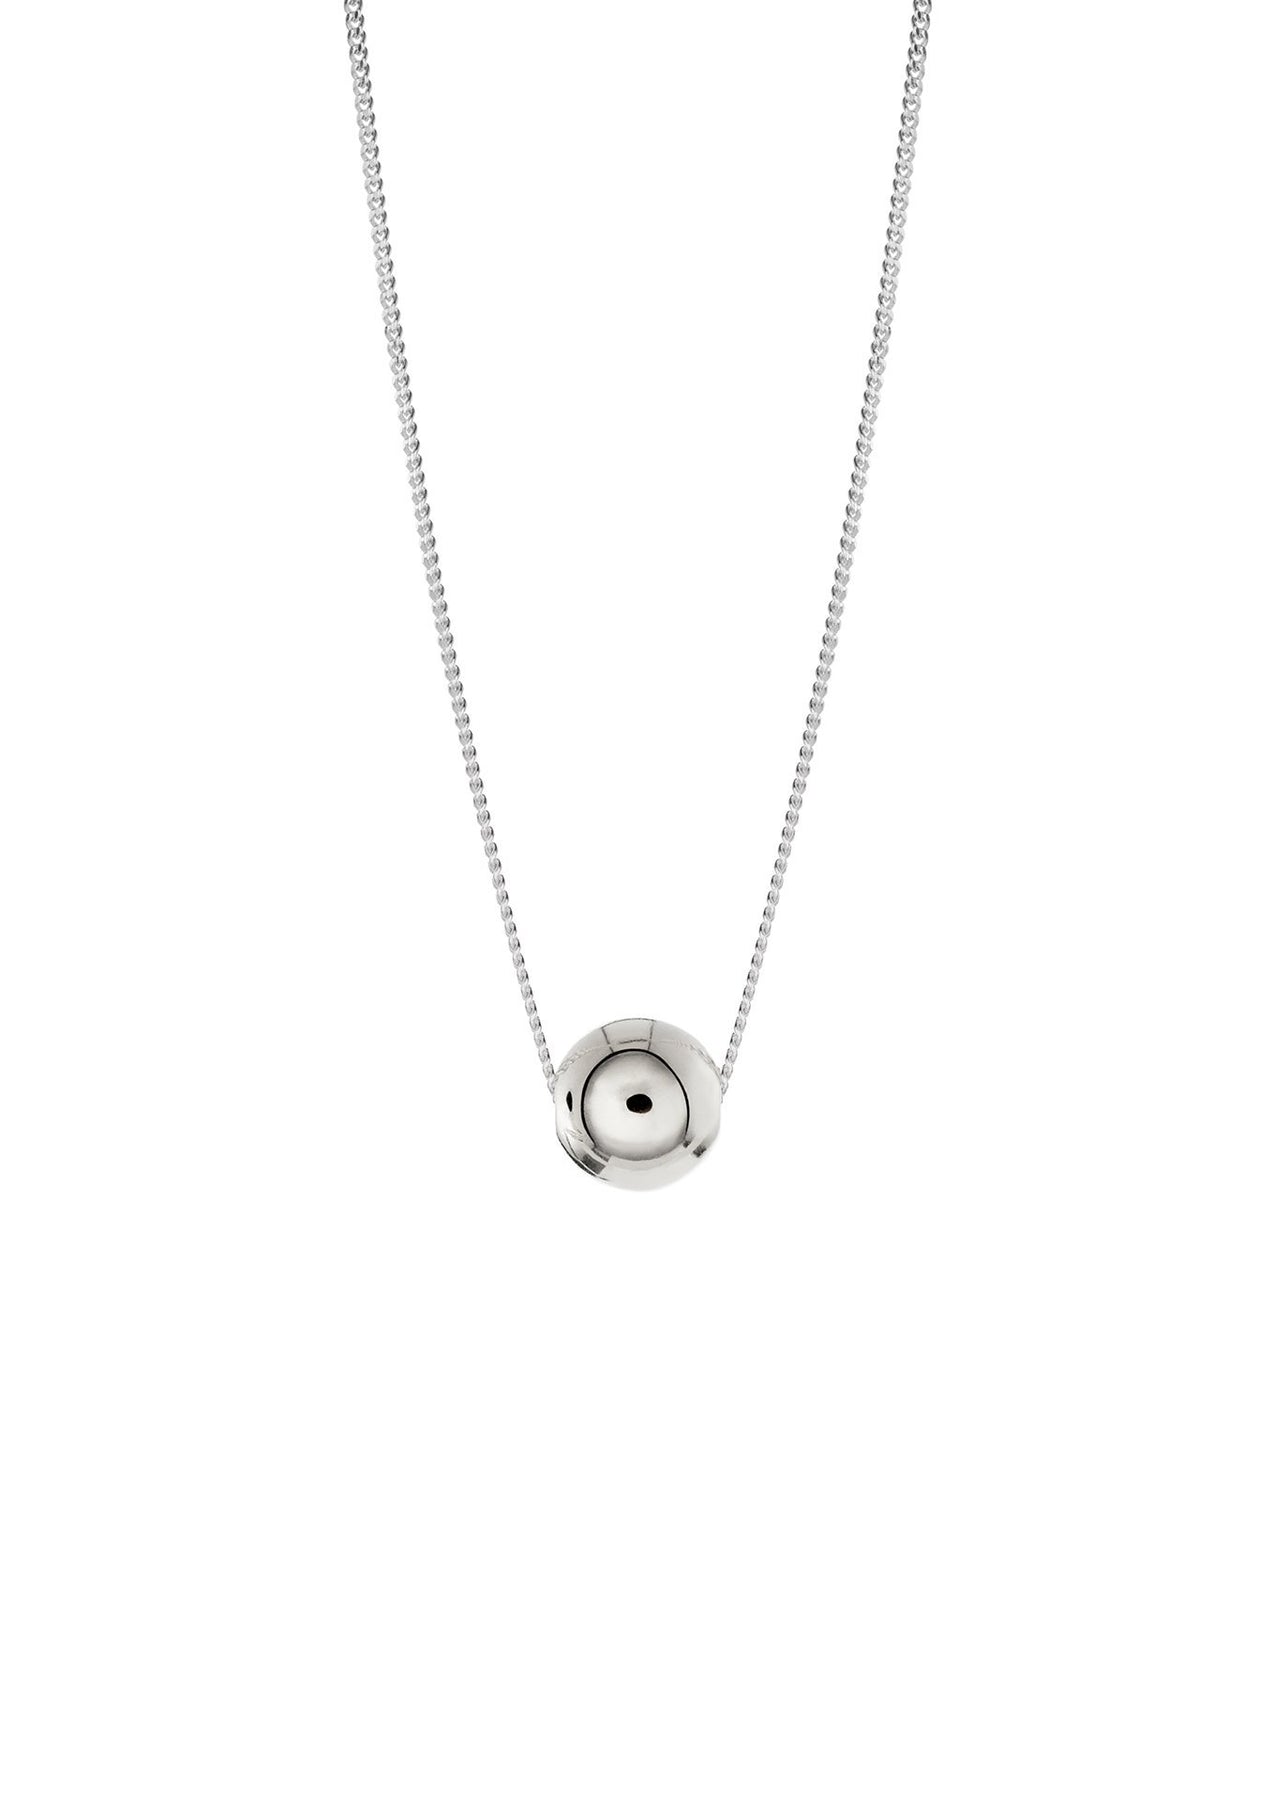 Sterling silver Bubble Necklace with 6mm hollow bubble pendant on a 40cm chain. Handmade in Lithuania, sustainable packaging, 2-year warranty by NO MORE.